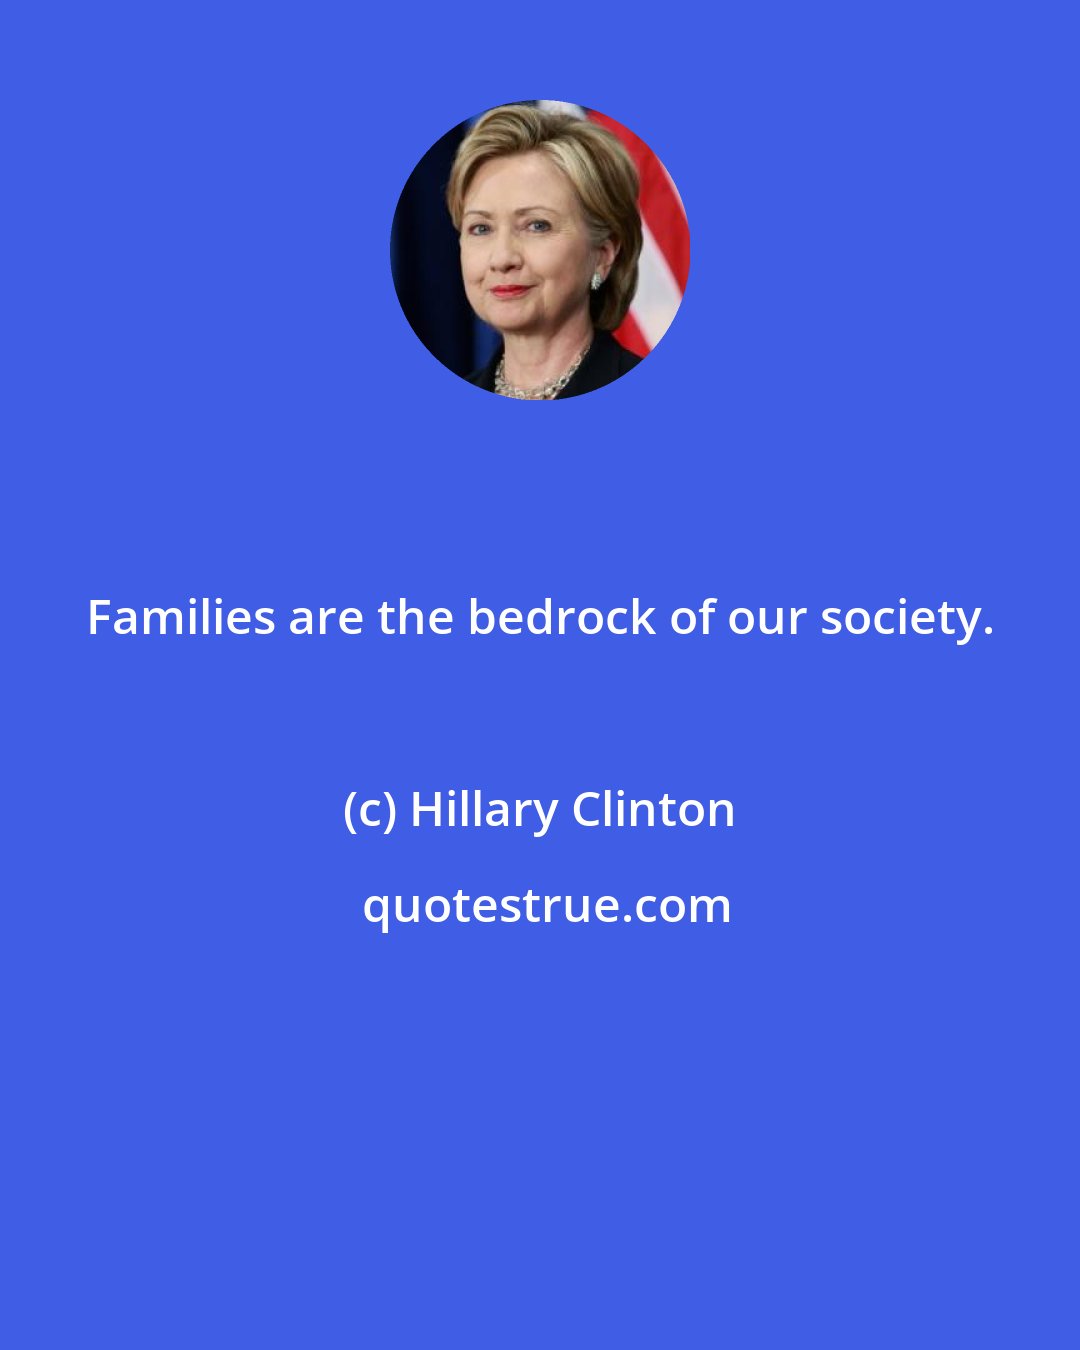 Hillary Clinton: Families are the bedrock of our society.